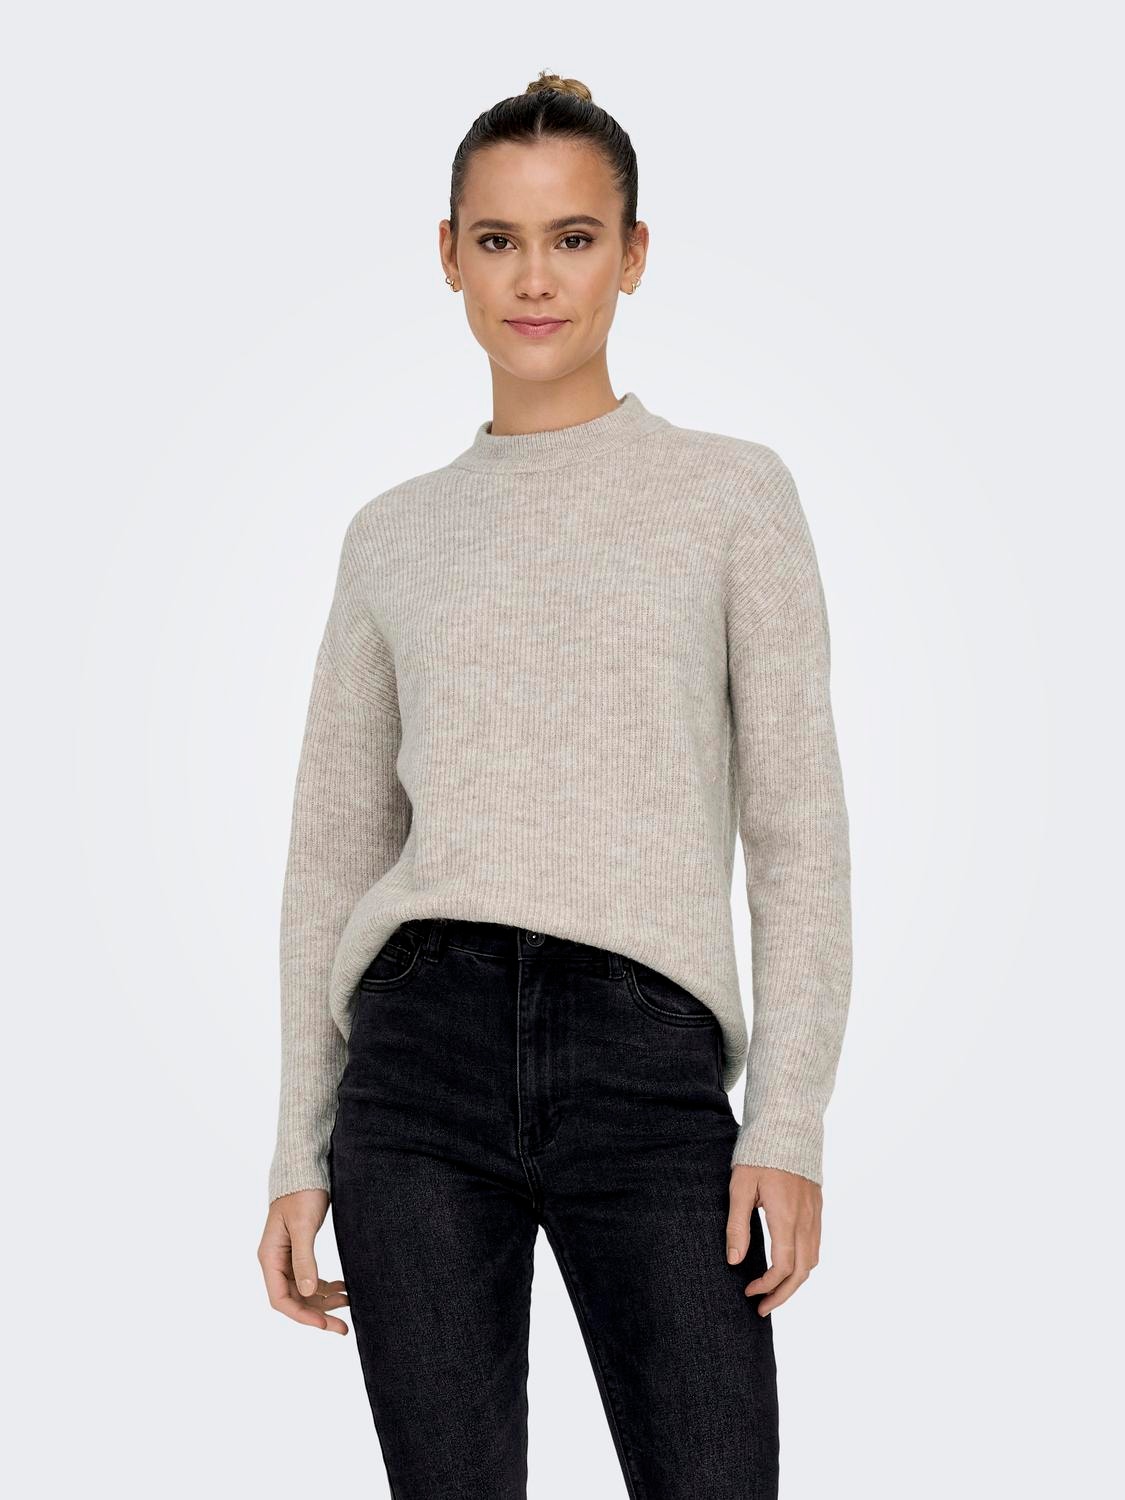 ONLY Regular Fit Round Neck Dropped shoulders Pullover -Pumice Stone - 15277080